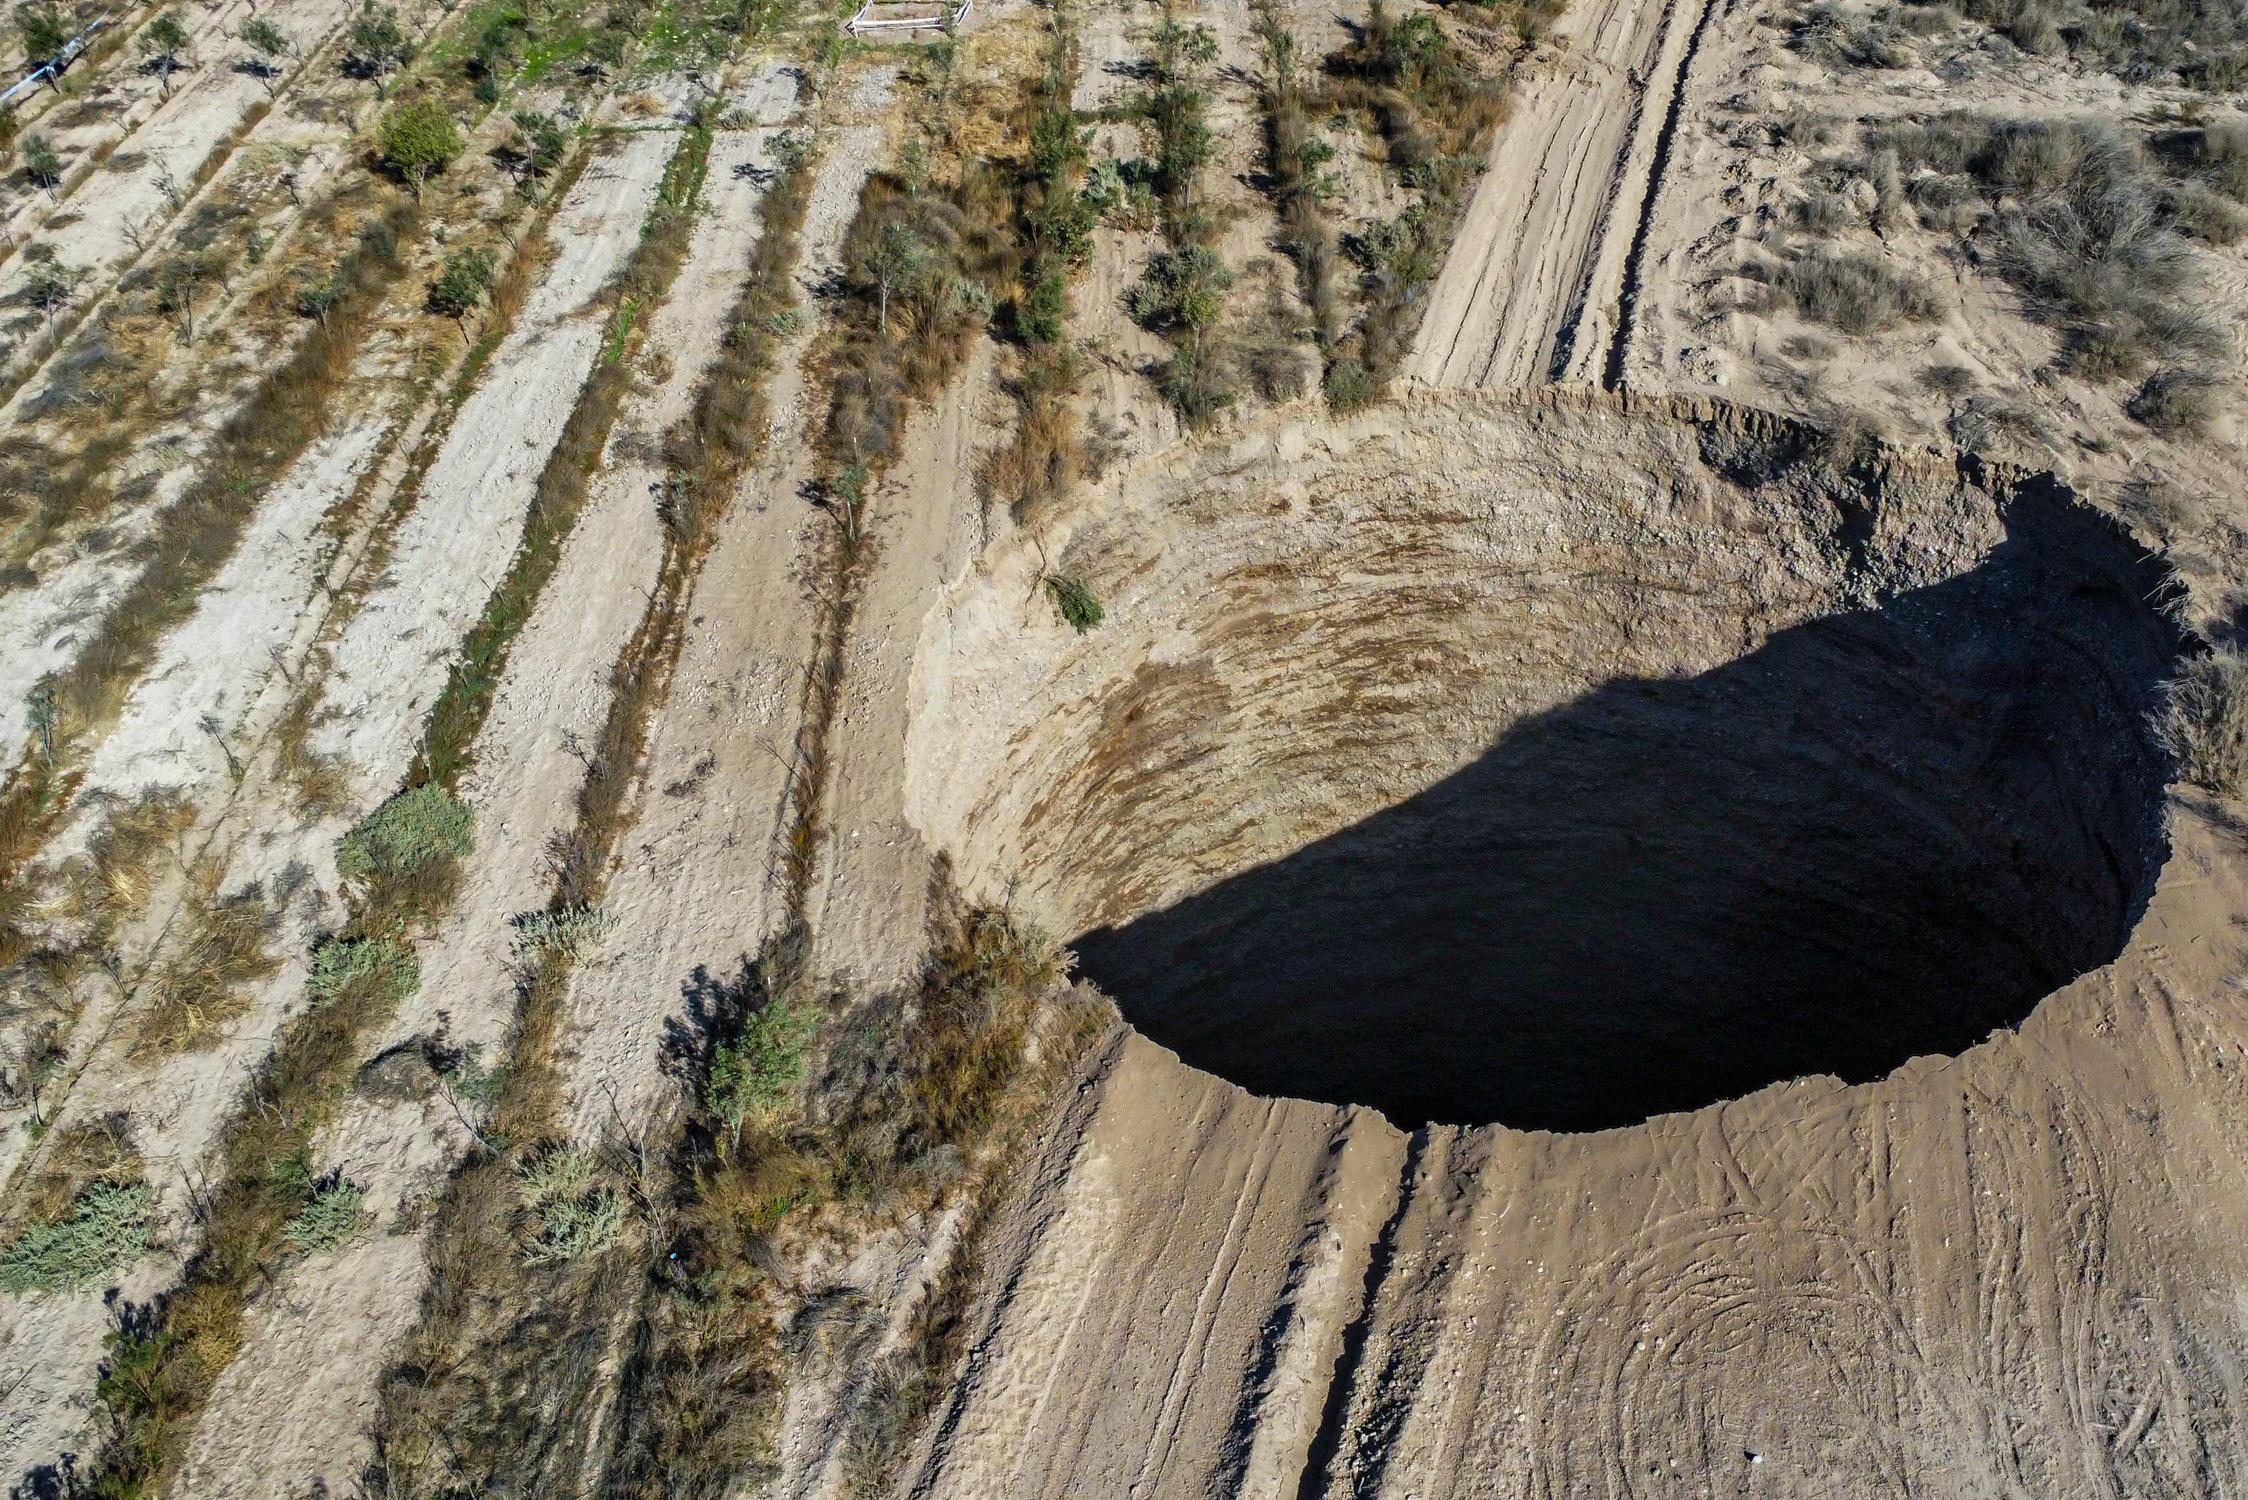 Gigantic sinkhole 200 meters deep formed near copper mine in Chile